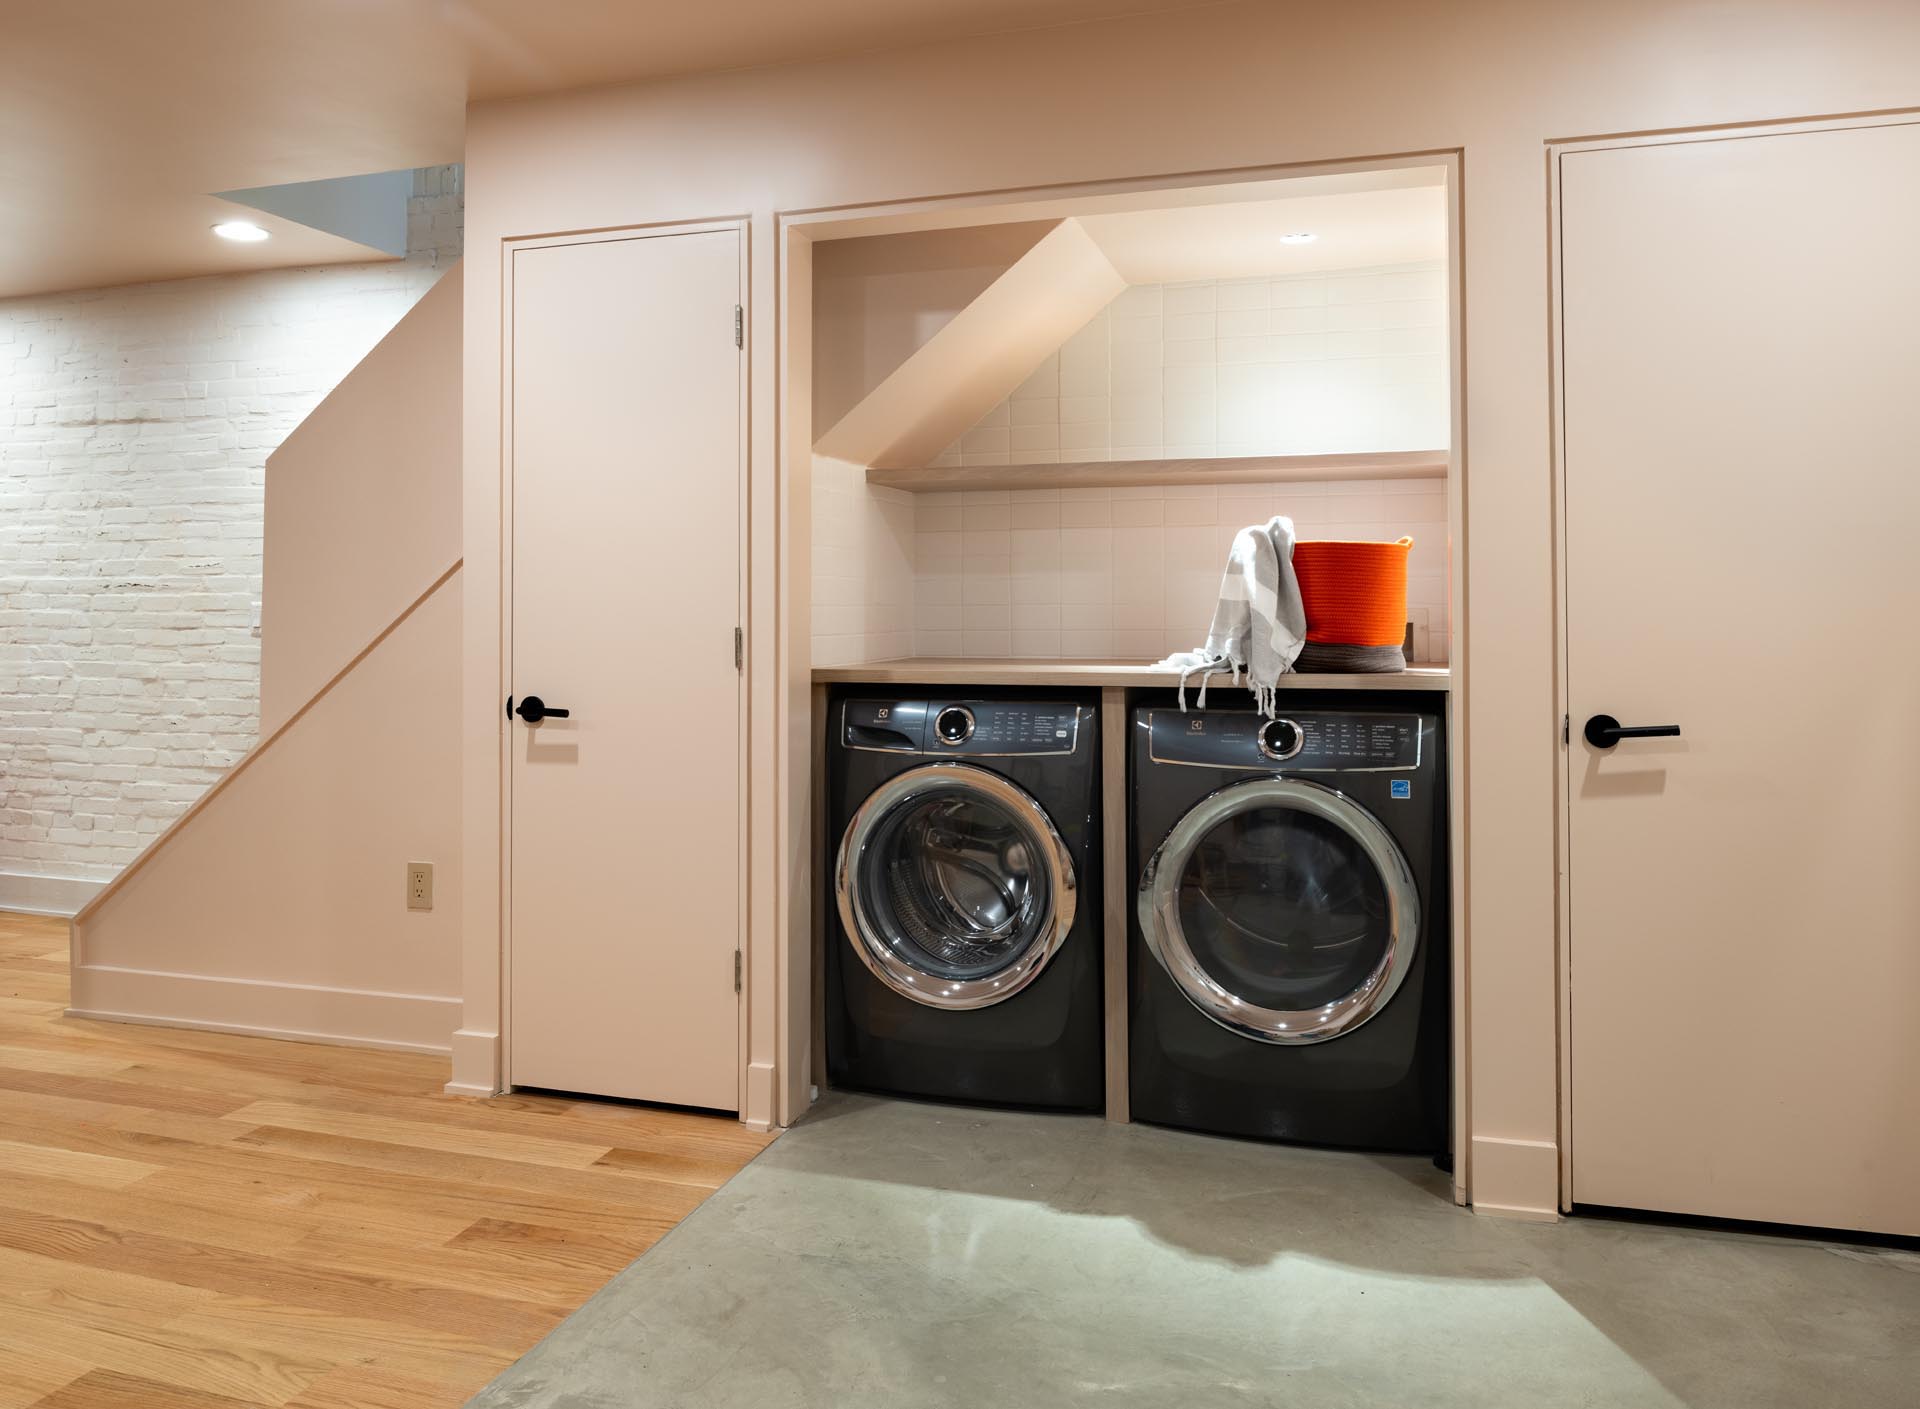 A new laundry area in a former closet in the basement.